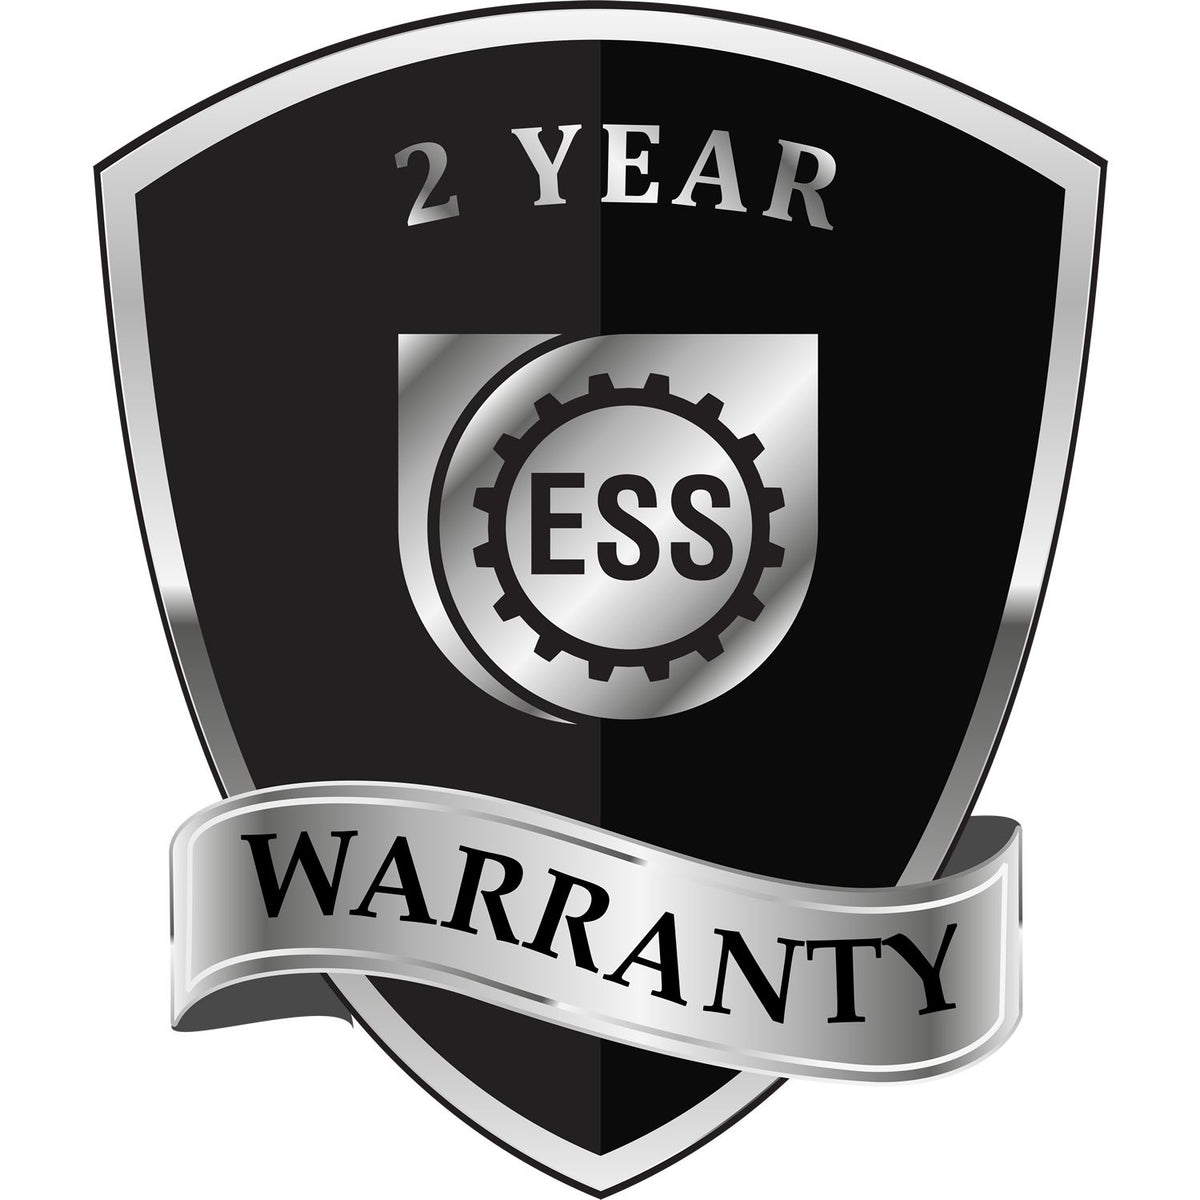 A black and silver badge or emblem showing warranty information for the Hybrid Connecticut Geologist Seal